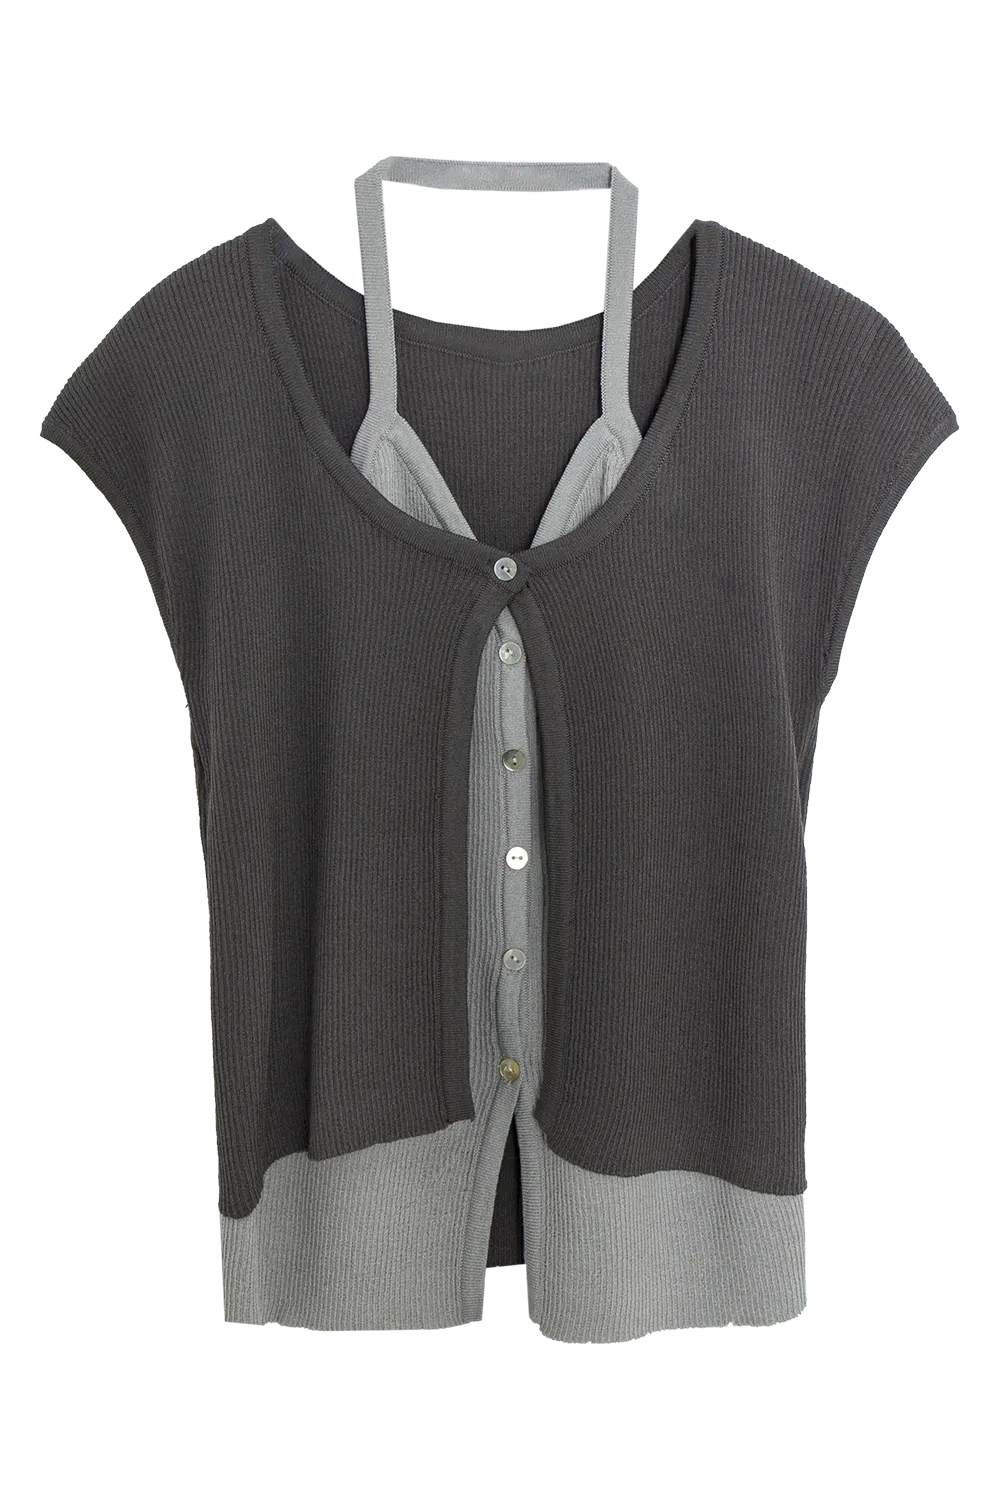 Women's Faux Layered T-Shirt with Cardigan and Camisole Design